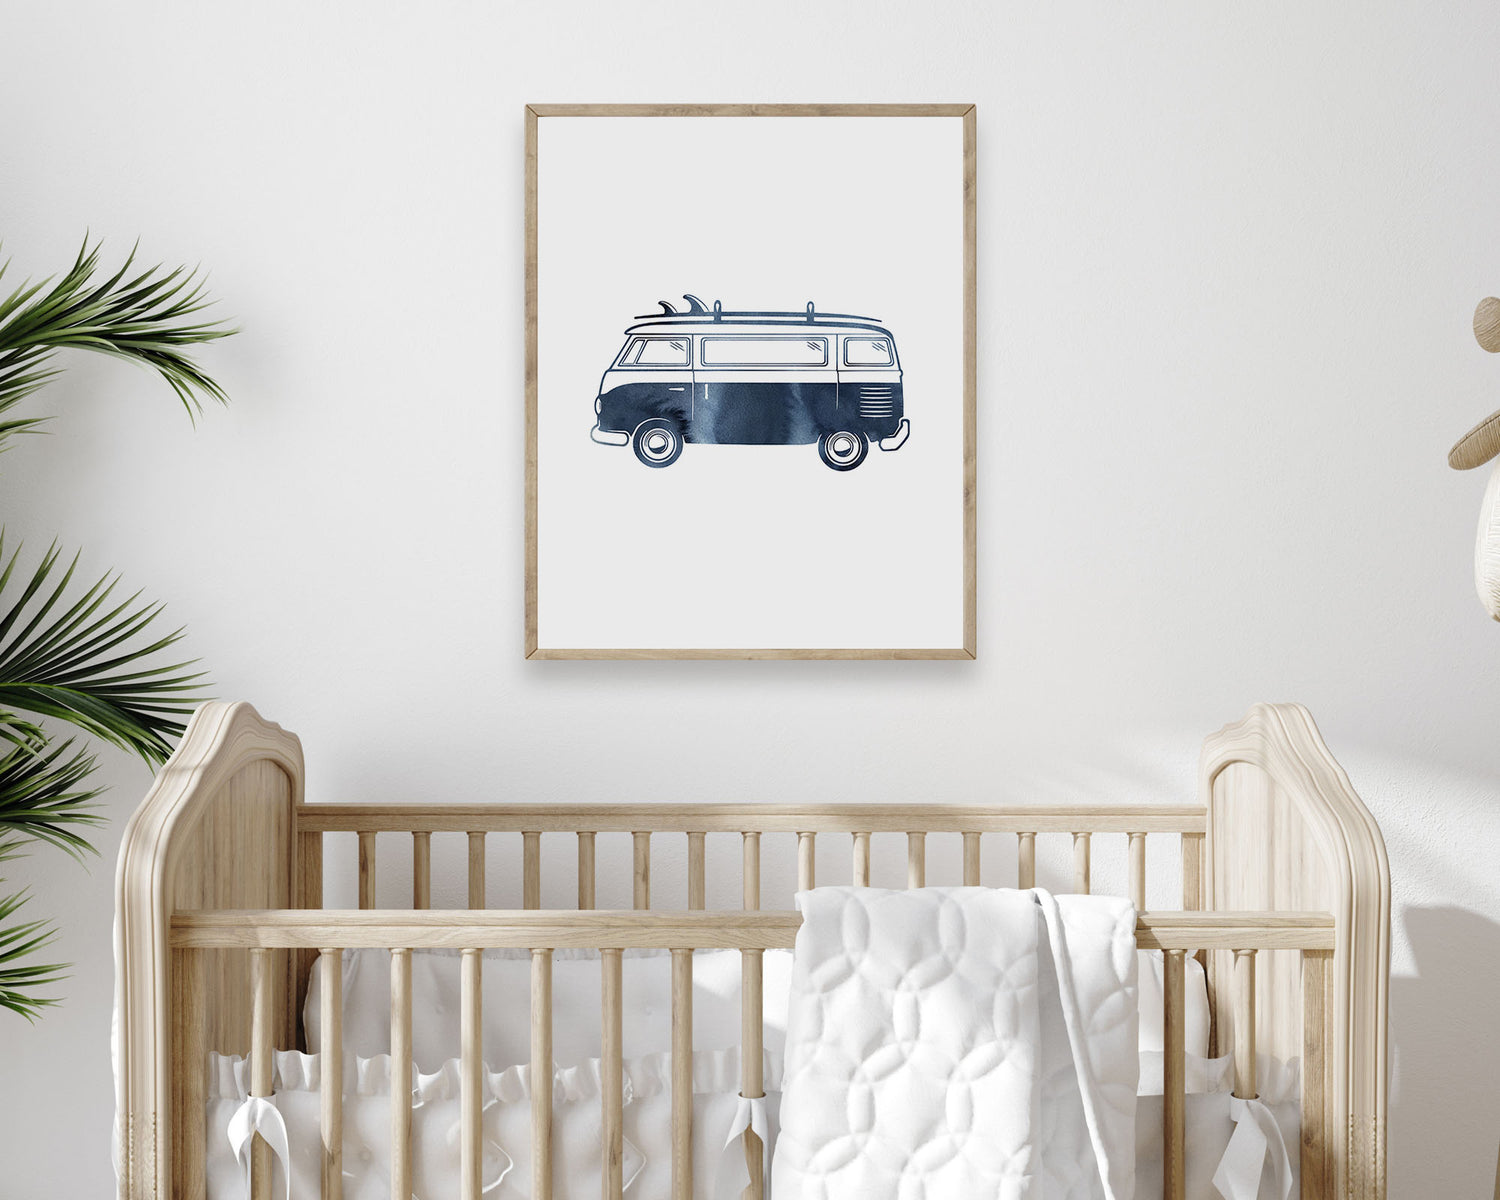 Watercolor Surf Van Printable Wall Art featuring navy blue watercolor illustration of a retro van with a surfboard on top. Perfect for Baby Boy Surf Nursery Decor, Baby Girl Surf Nursery Wall Art, Kids Coastal Bedroom Decor, Children's Beach Bathroom Wall Art or California Beach Wall Art Playroom Decor.